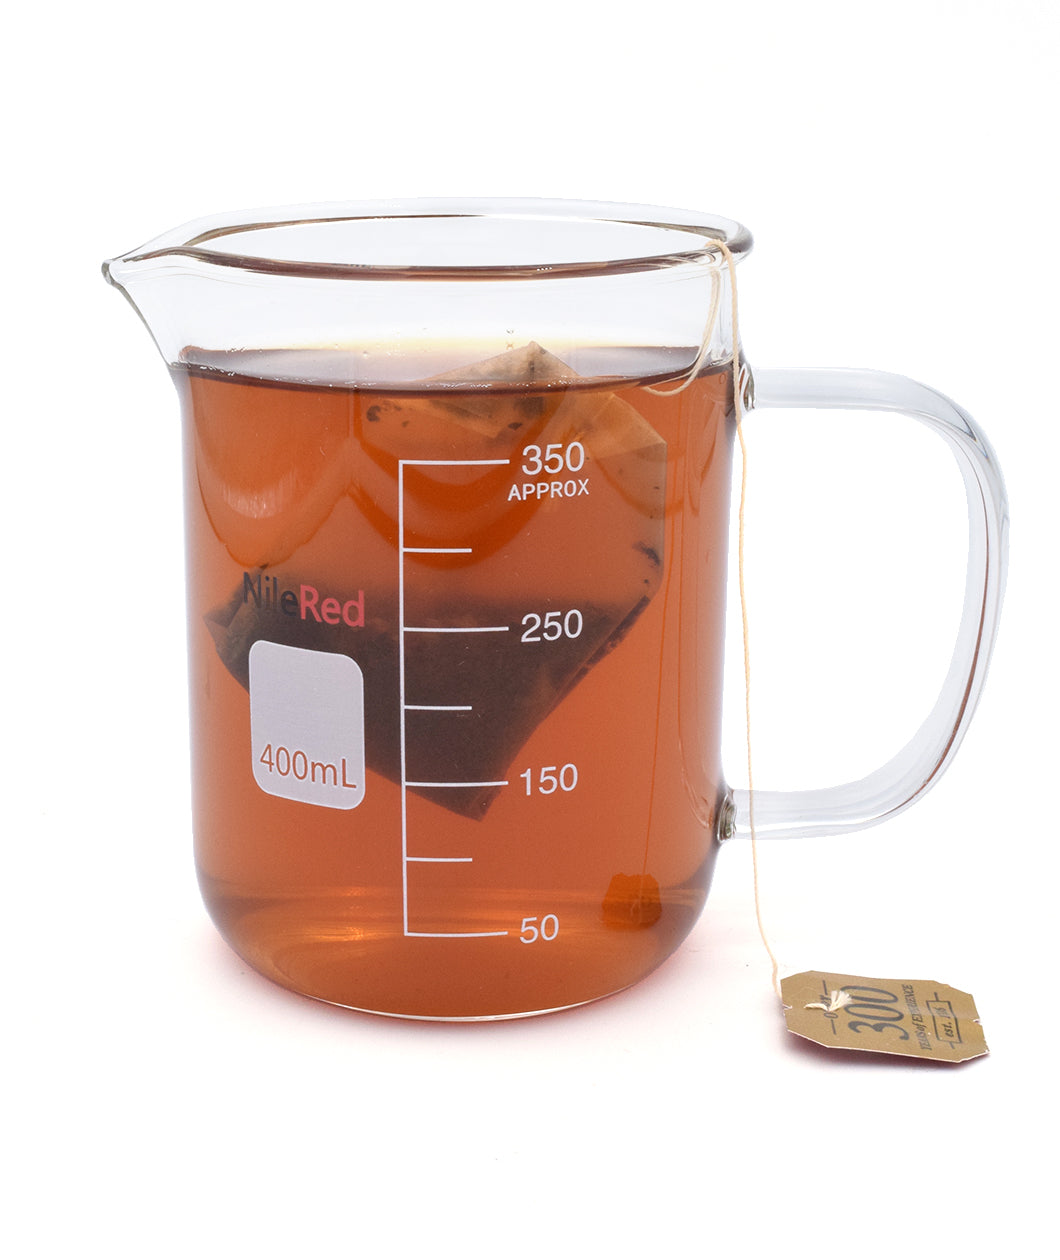 A glass beaker with a mug handle full of brown tea and a tea bag. On the side of the mug is the NileRed logo and a square that says 400mL and shows a scale of 350mL.